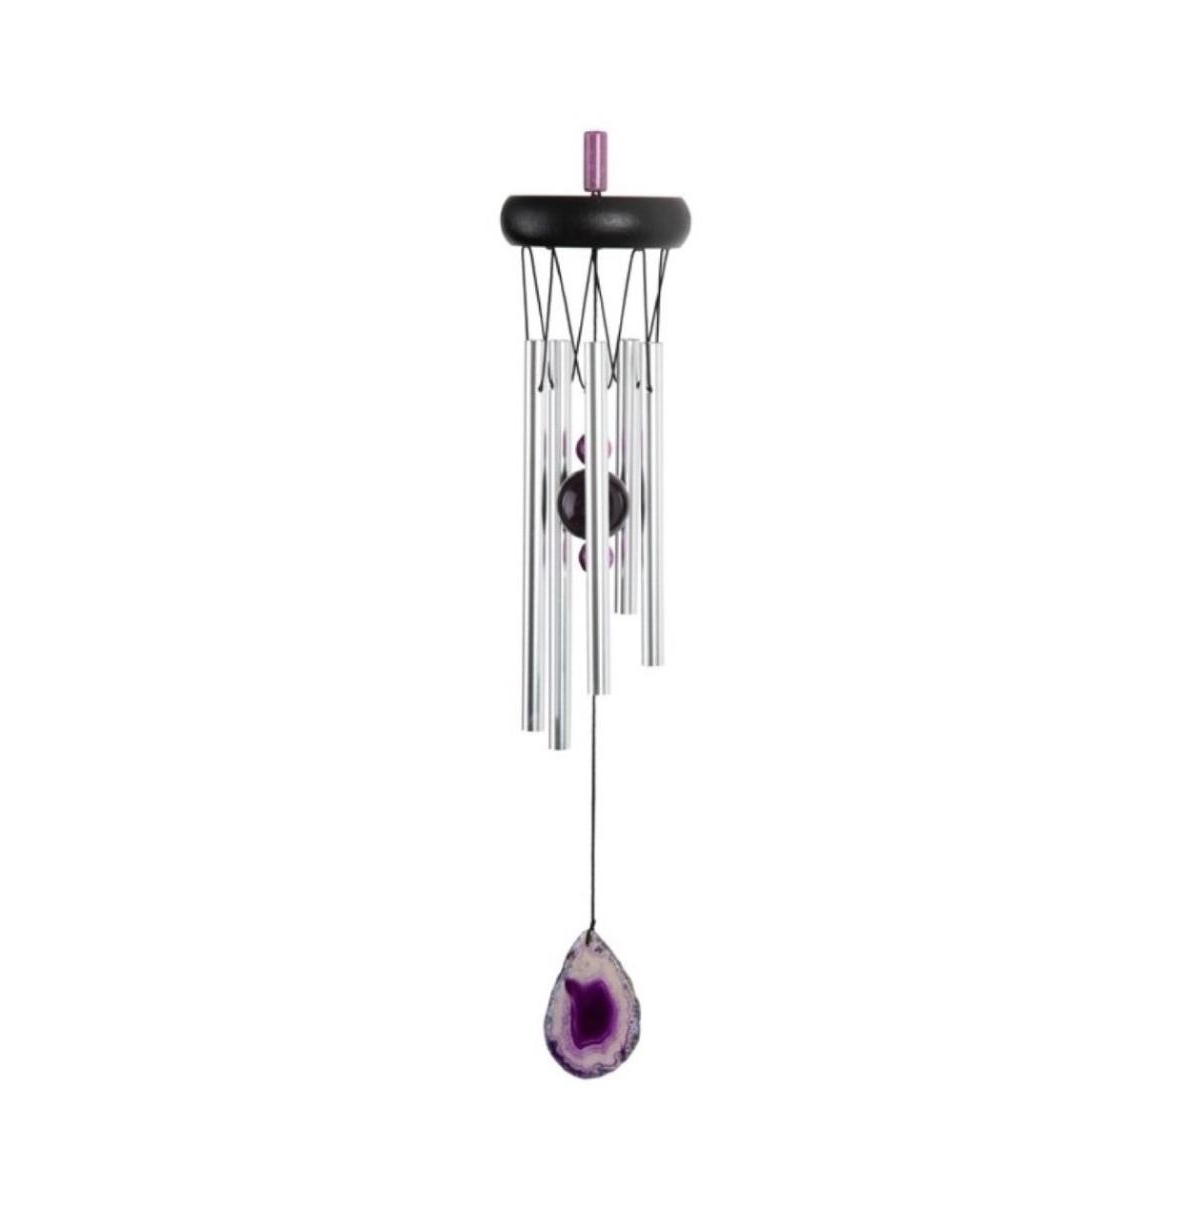 20" Long Wooden Top Purple Geode Wind Chime Home Decor Perfect Gift for House Warming, Holidays and Birthdays - Silver